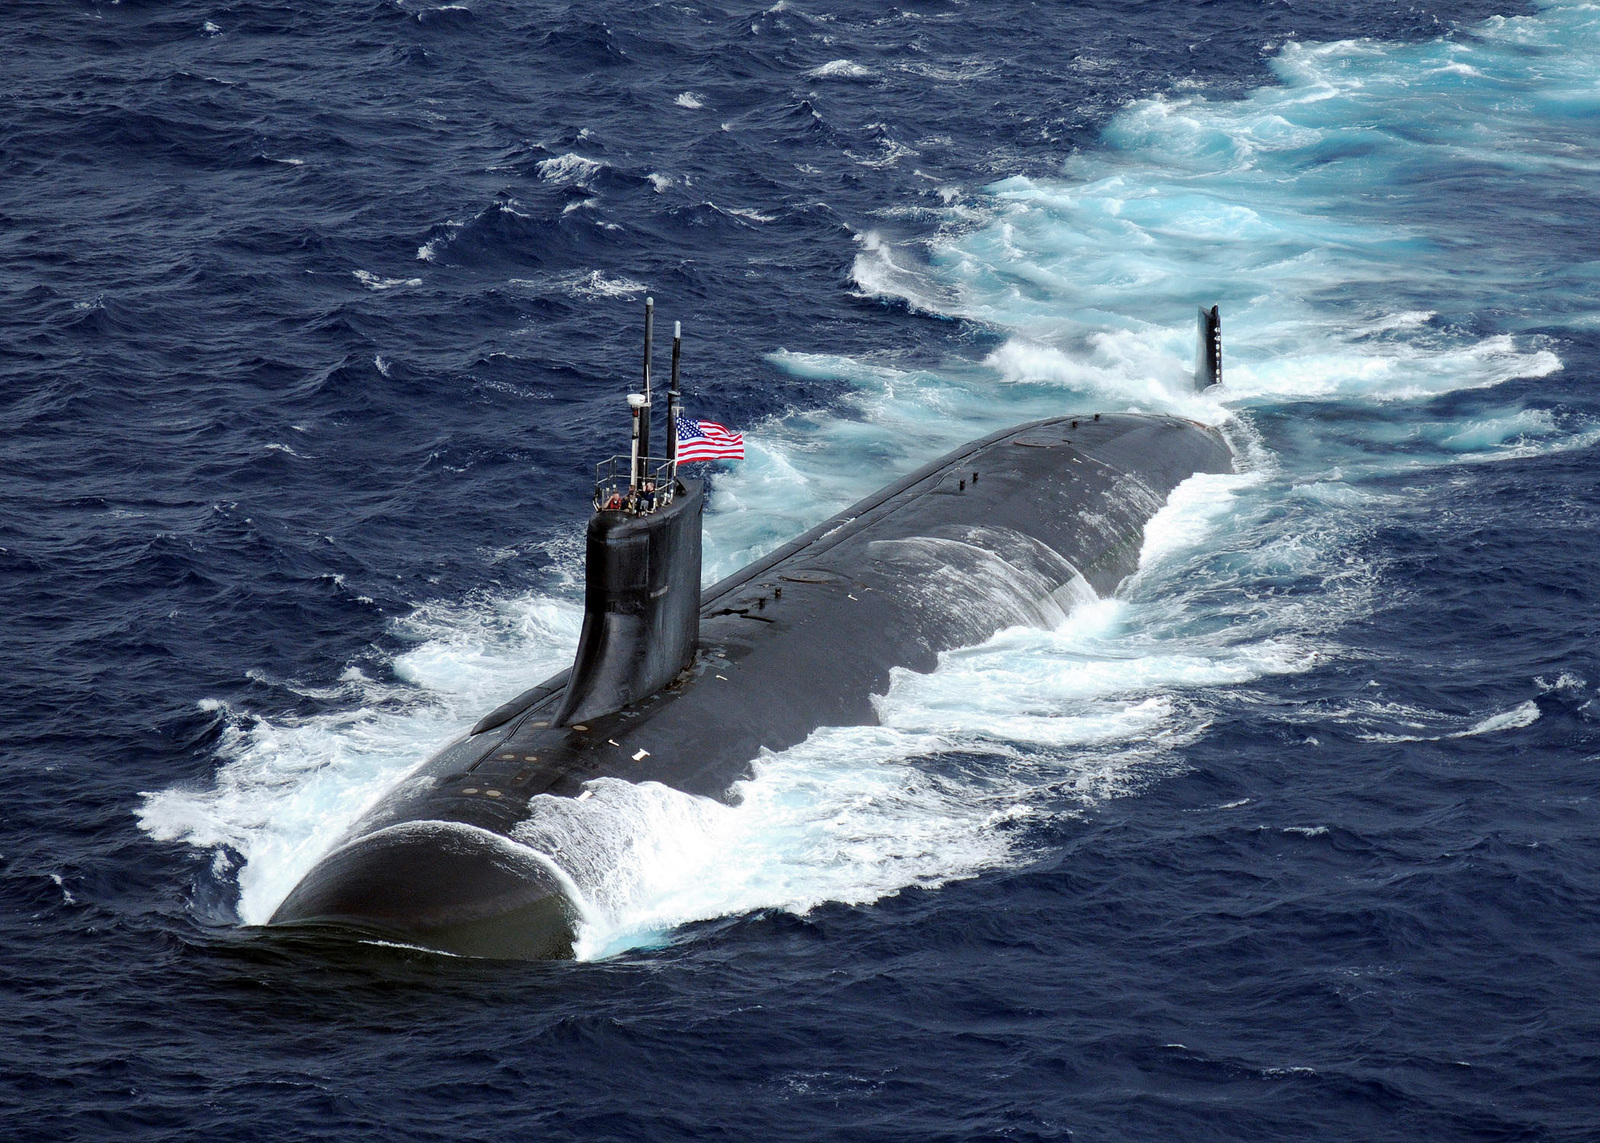 Seawolf-class_attack_submarine_USS_Connecticut_%2528SSN_22%2529_is_underway_in_the_Pacific_Ocean.jpg